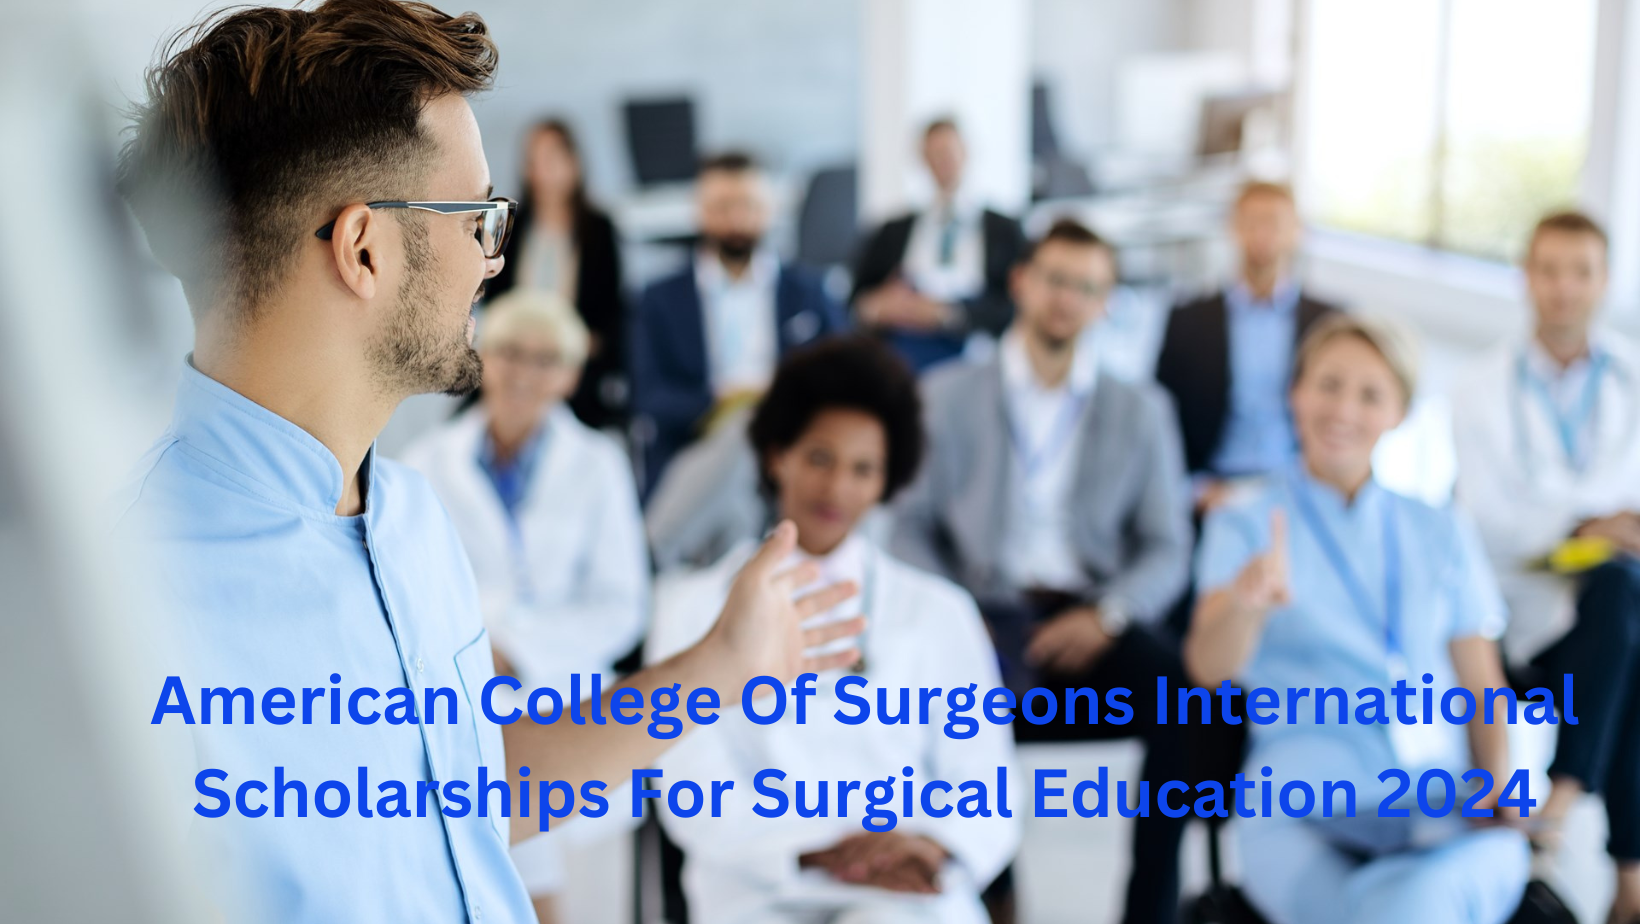 International Students' Medical Scholarships at the American College of Surgeons 2024